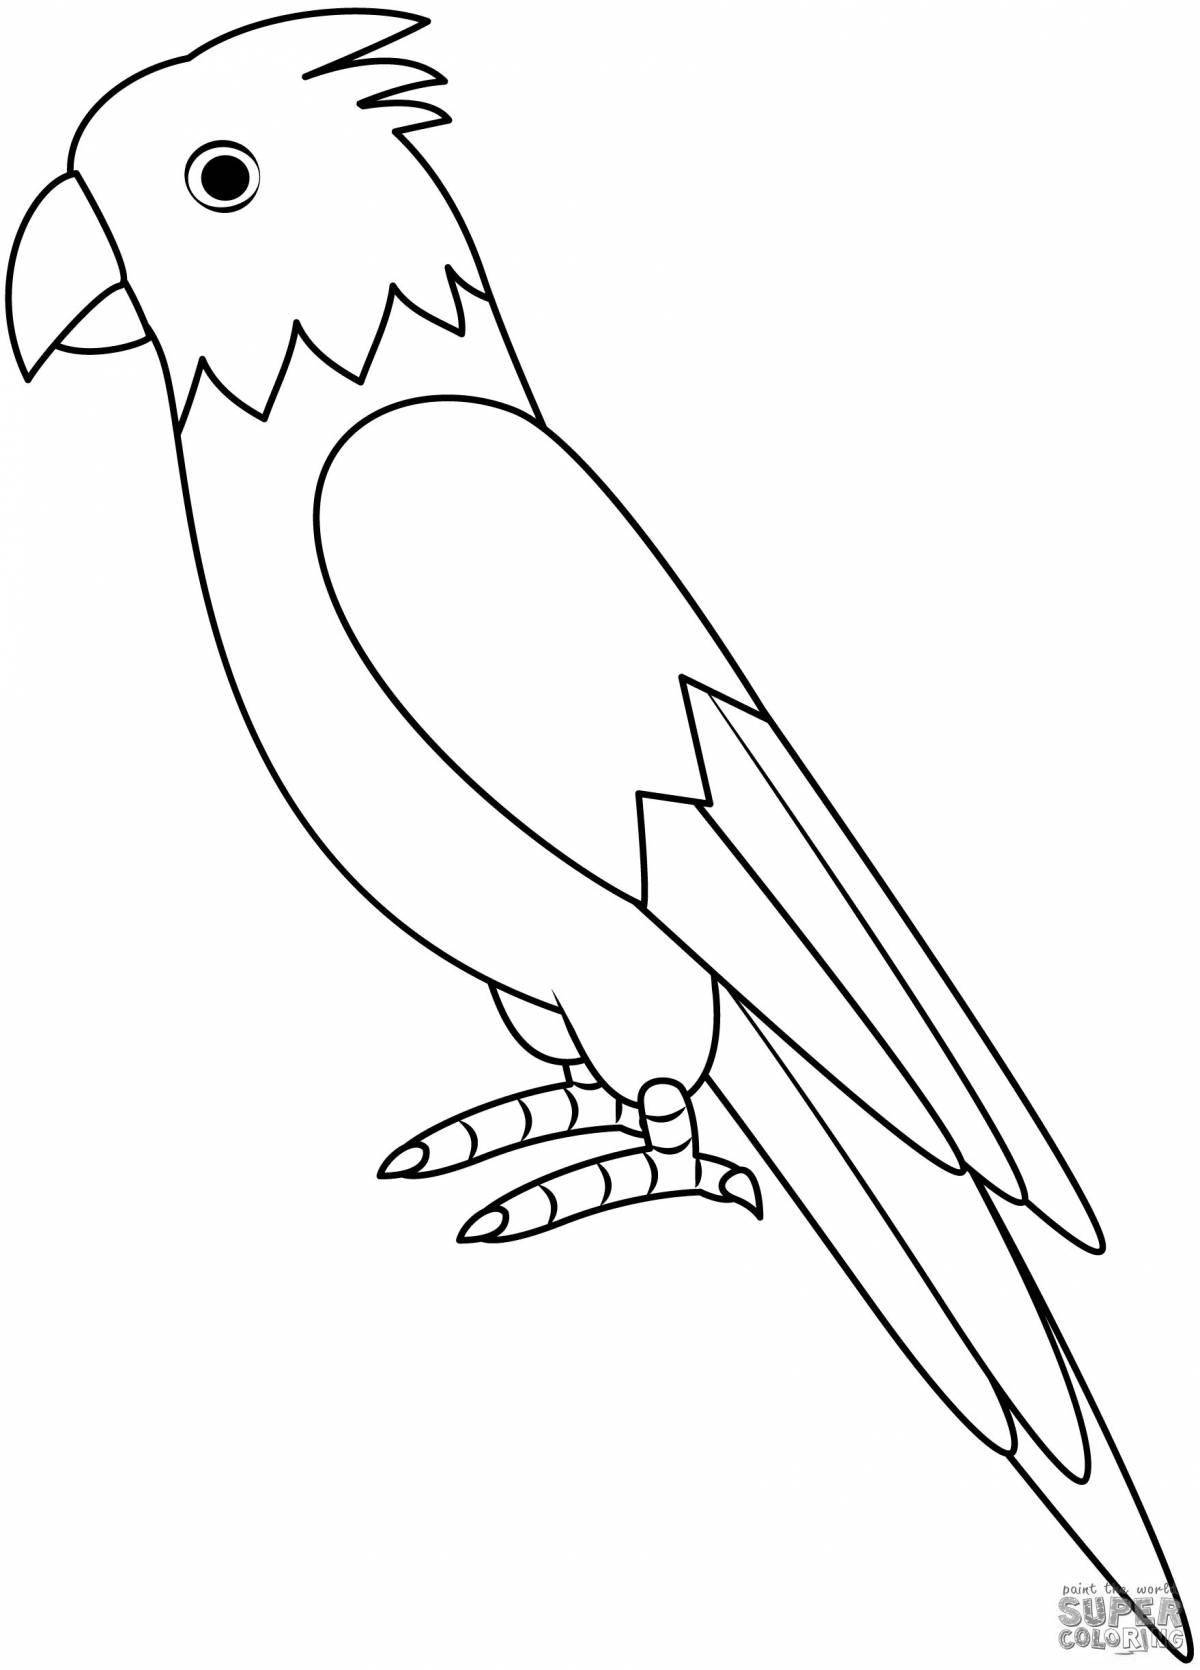 Exquisite parrot coloring book for 3-4 year olds